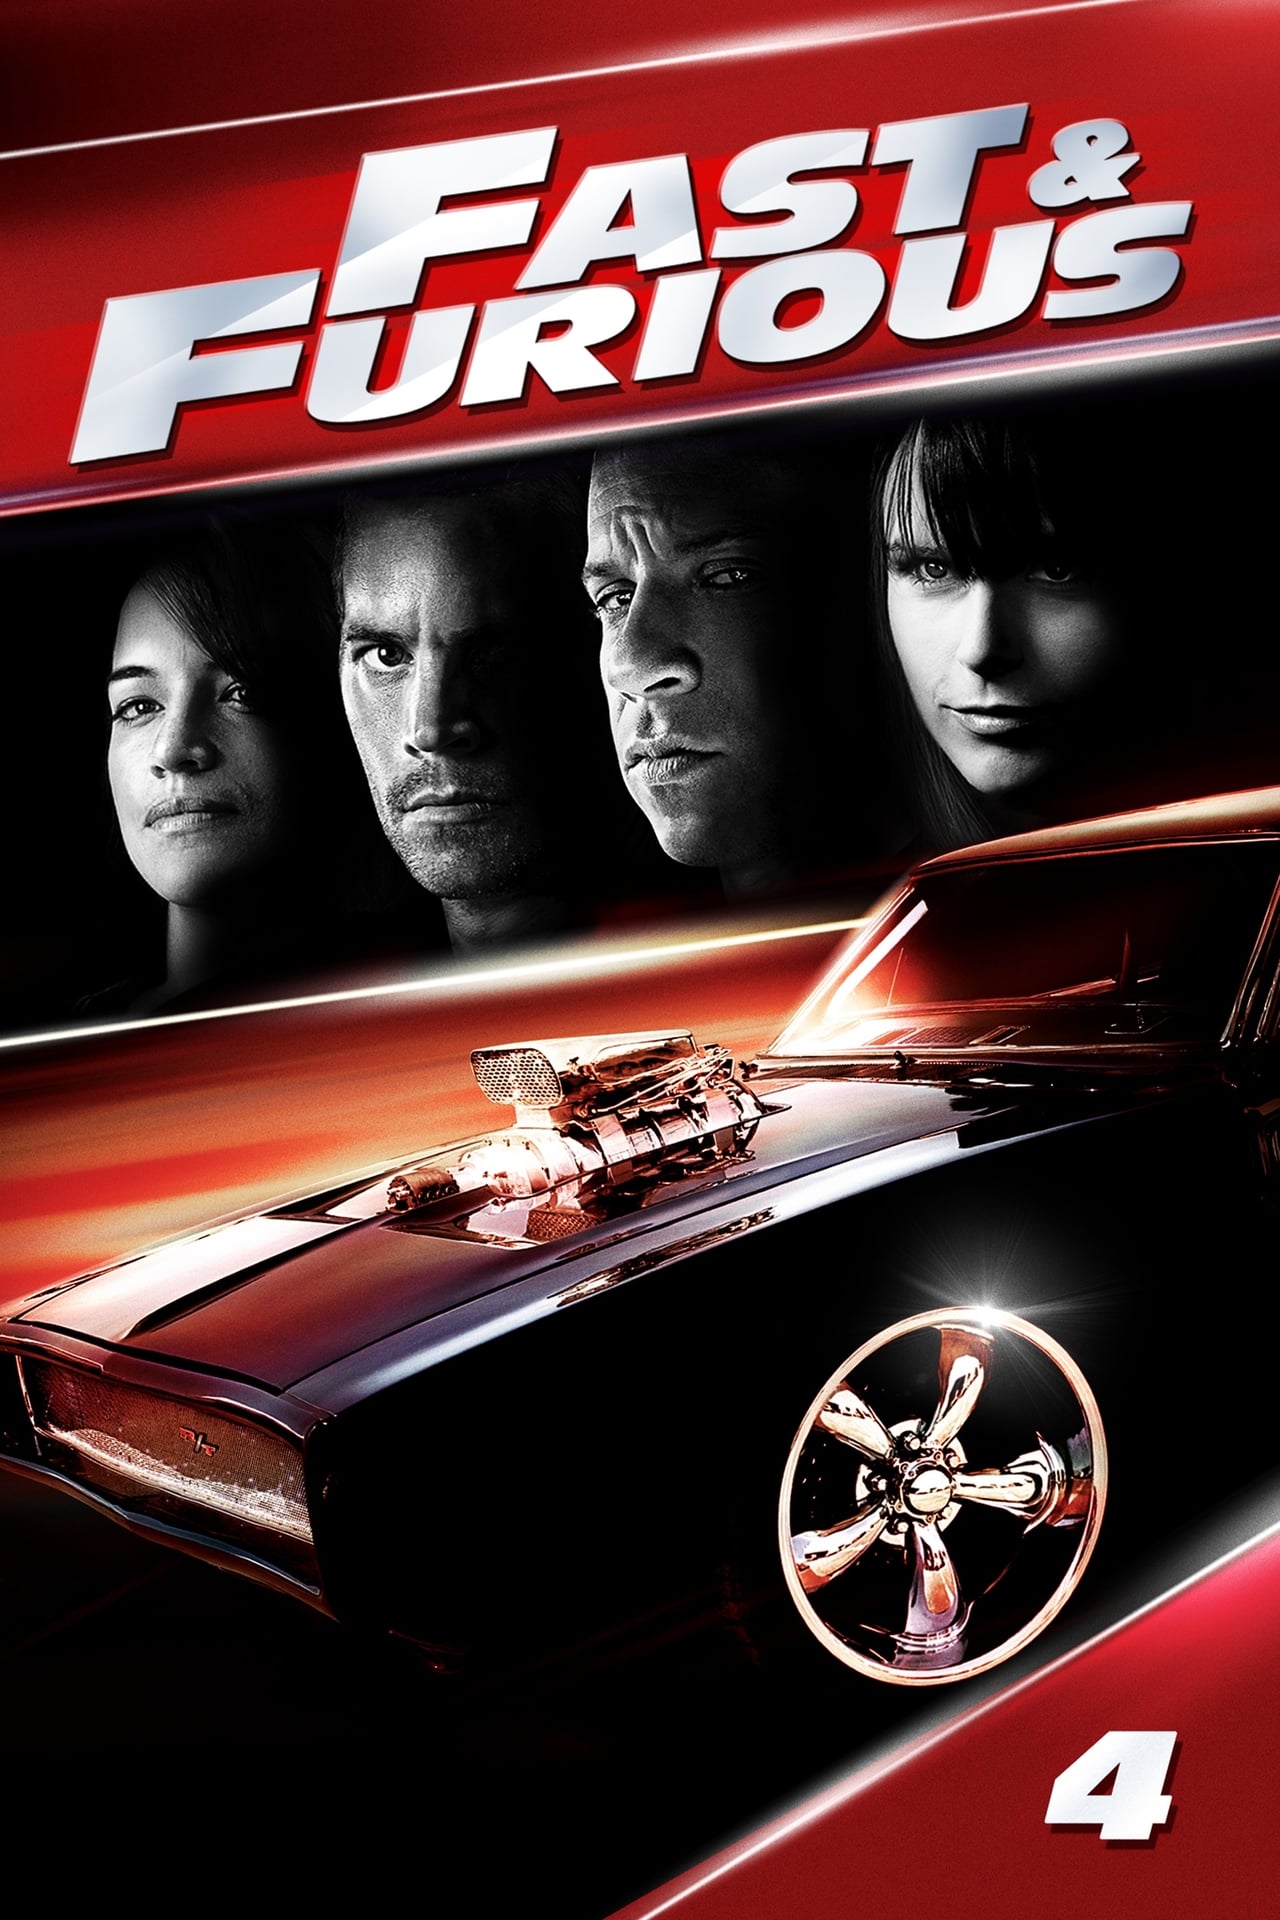 Download Fast And Furious 4 – Fast & Furious (2009) Full Movie In HD Dual Audio (Hin-Eng)